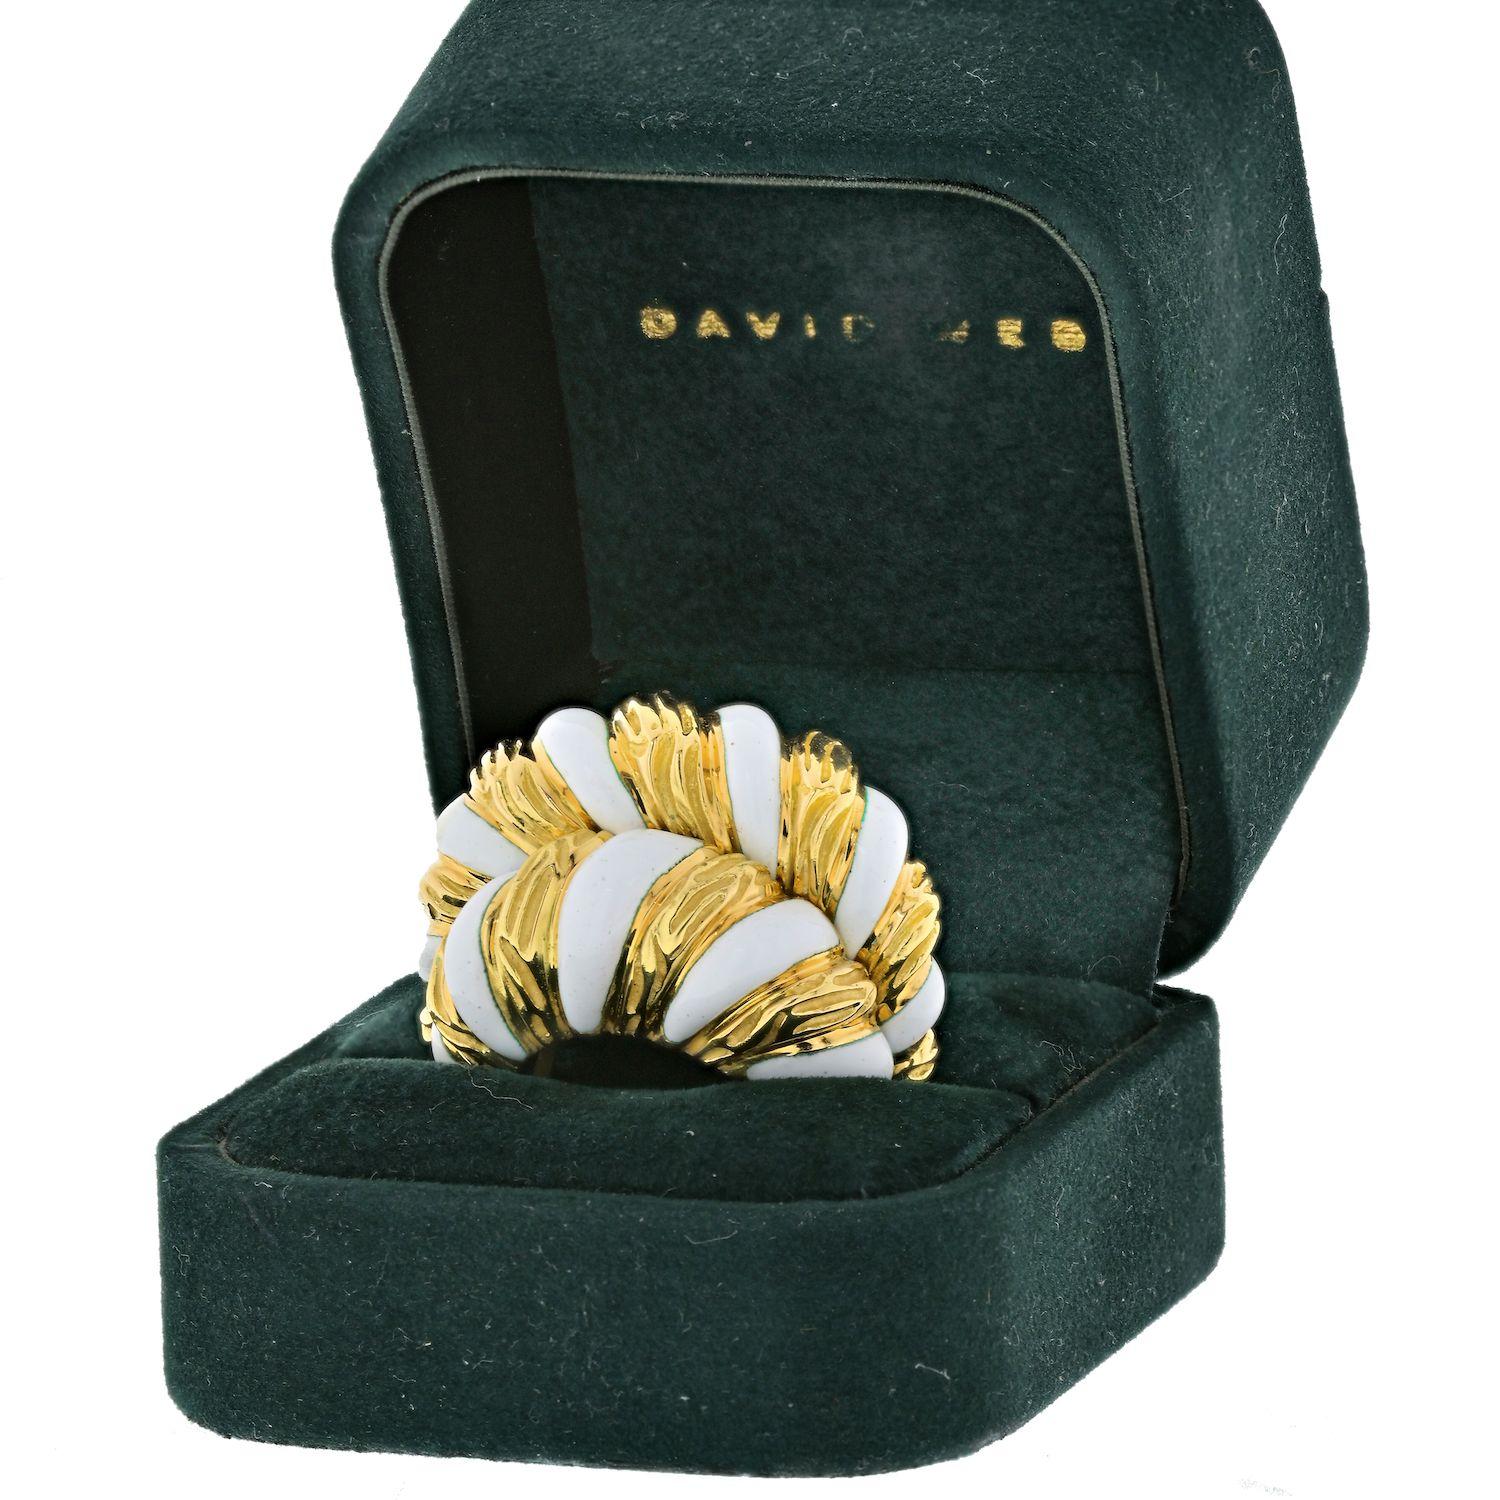 18K yellow gold vintage David Webb gold ring designed as three stacked shrimp bands with alternating white enamel and brushed gold sections. Marked WEBB 18K. Ring size 6-1/2 with built-in U-shaped sizer in shank. 